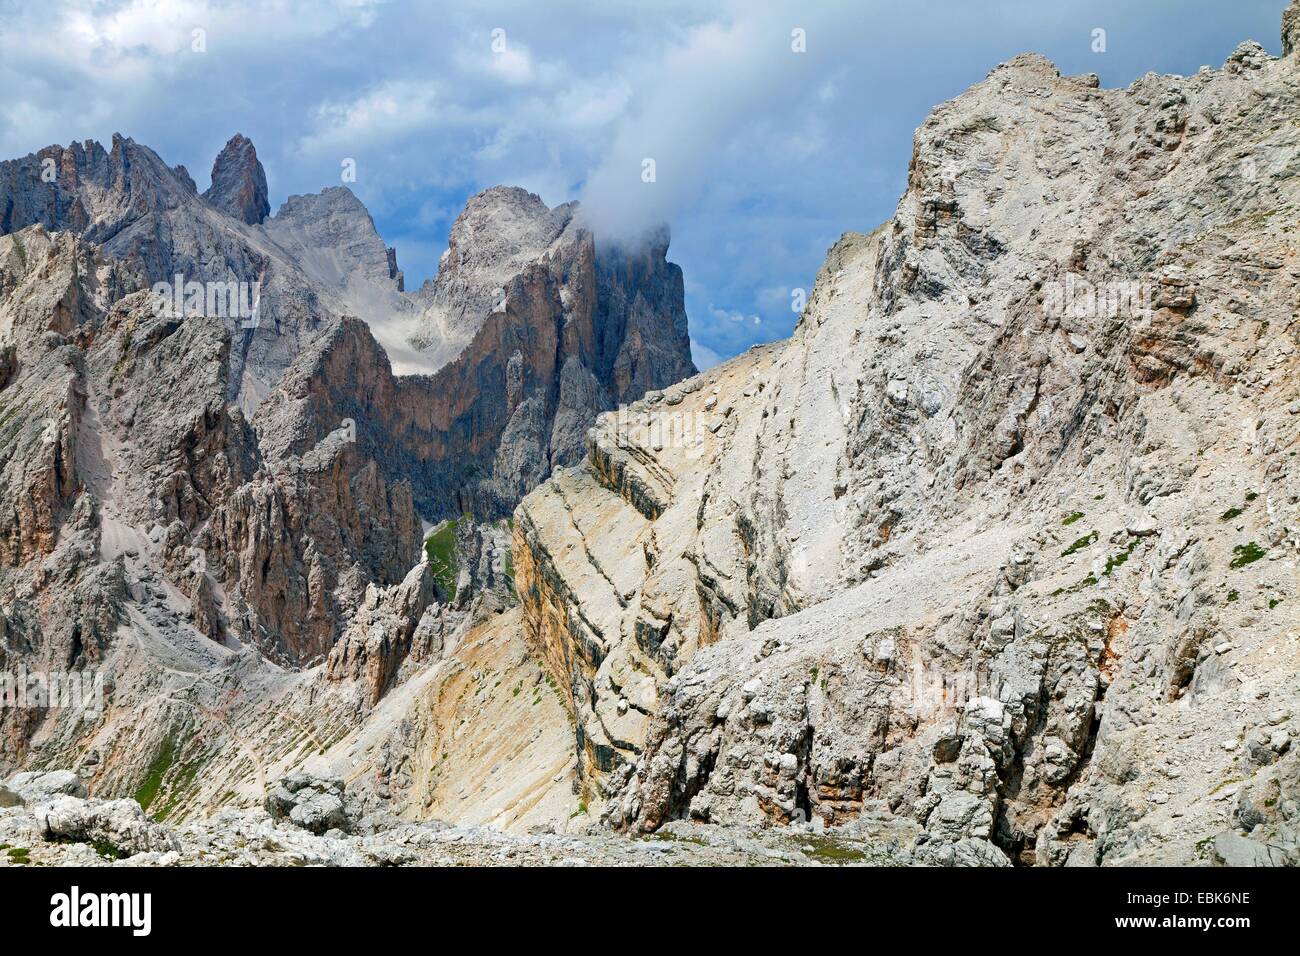 mountain scenery of Forcella della Roa and Forcella Nives, Italy, South Tyrol, Dolomites Stock Photo